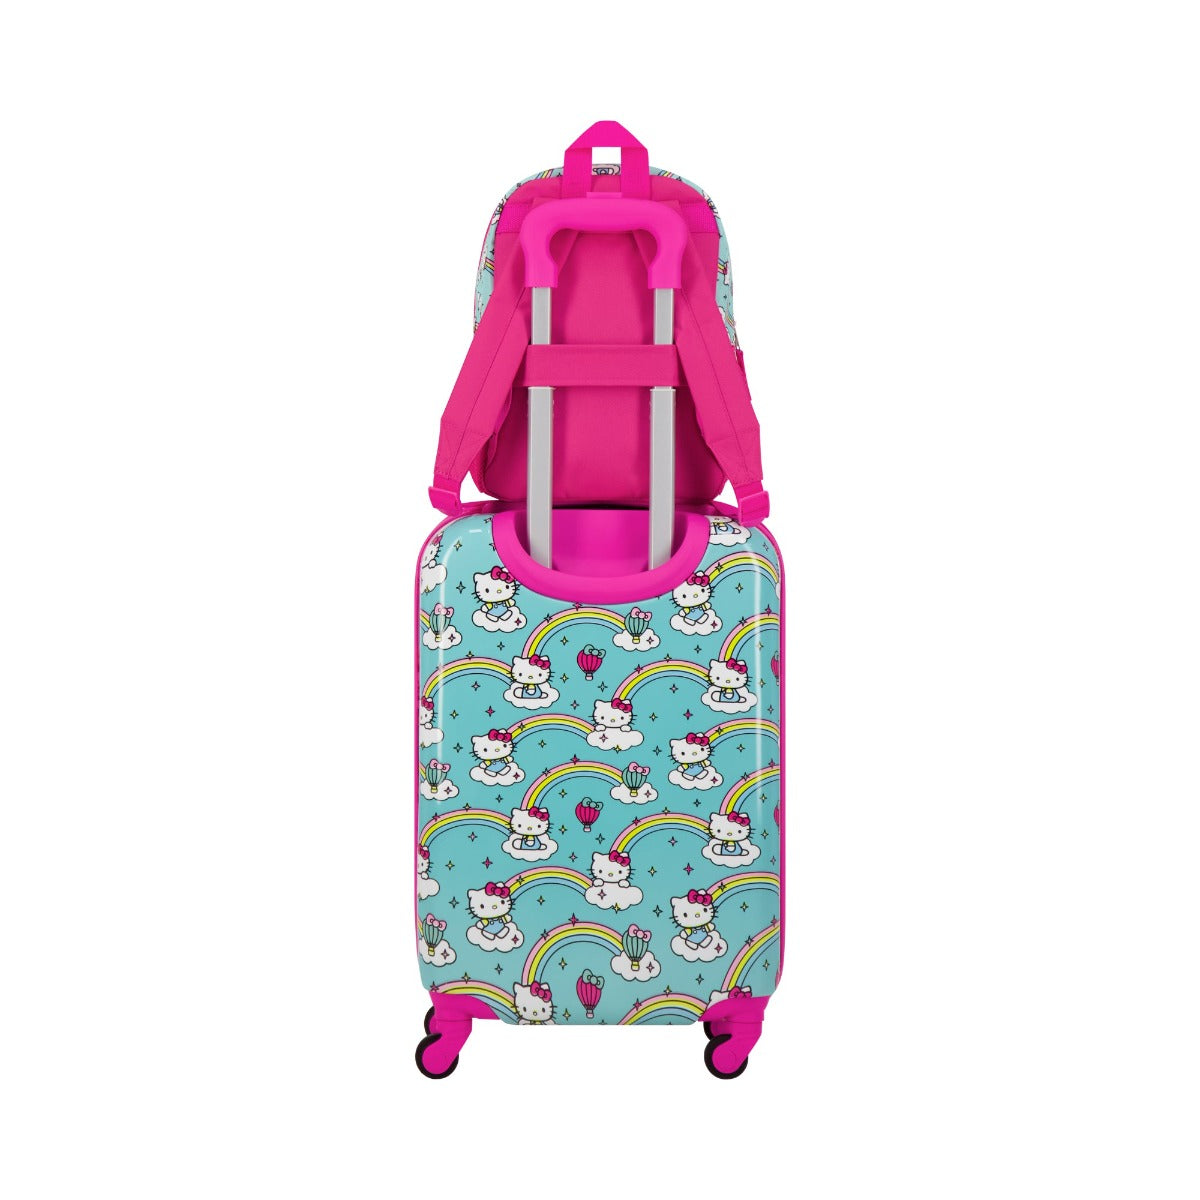 Hello Kitty Ful Rainbows kids matching 2 piece set with 21" suitcase 13" backpack for traveling